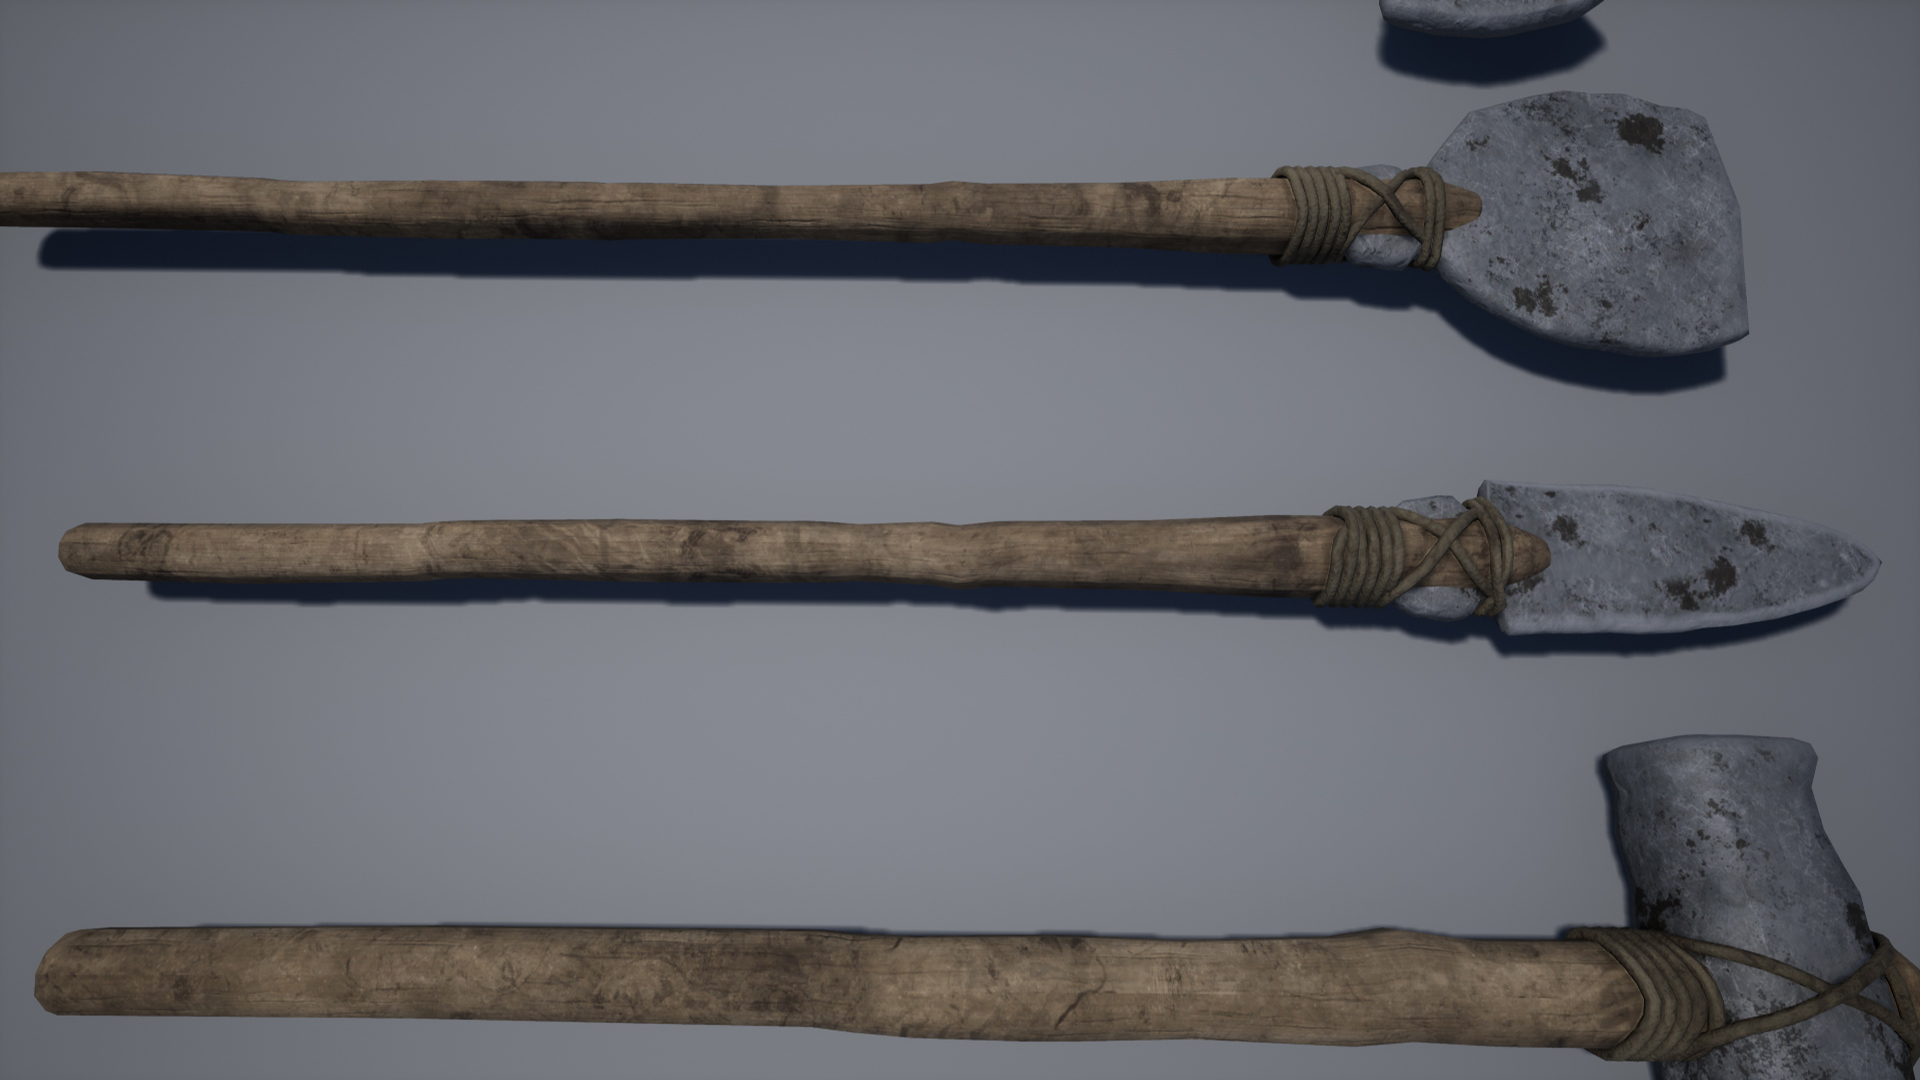 Ancient Tools Pack by SvitchMark in Props - UE4 Marketplace